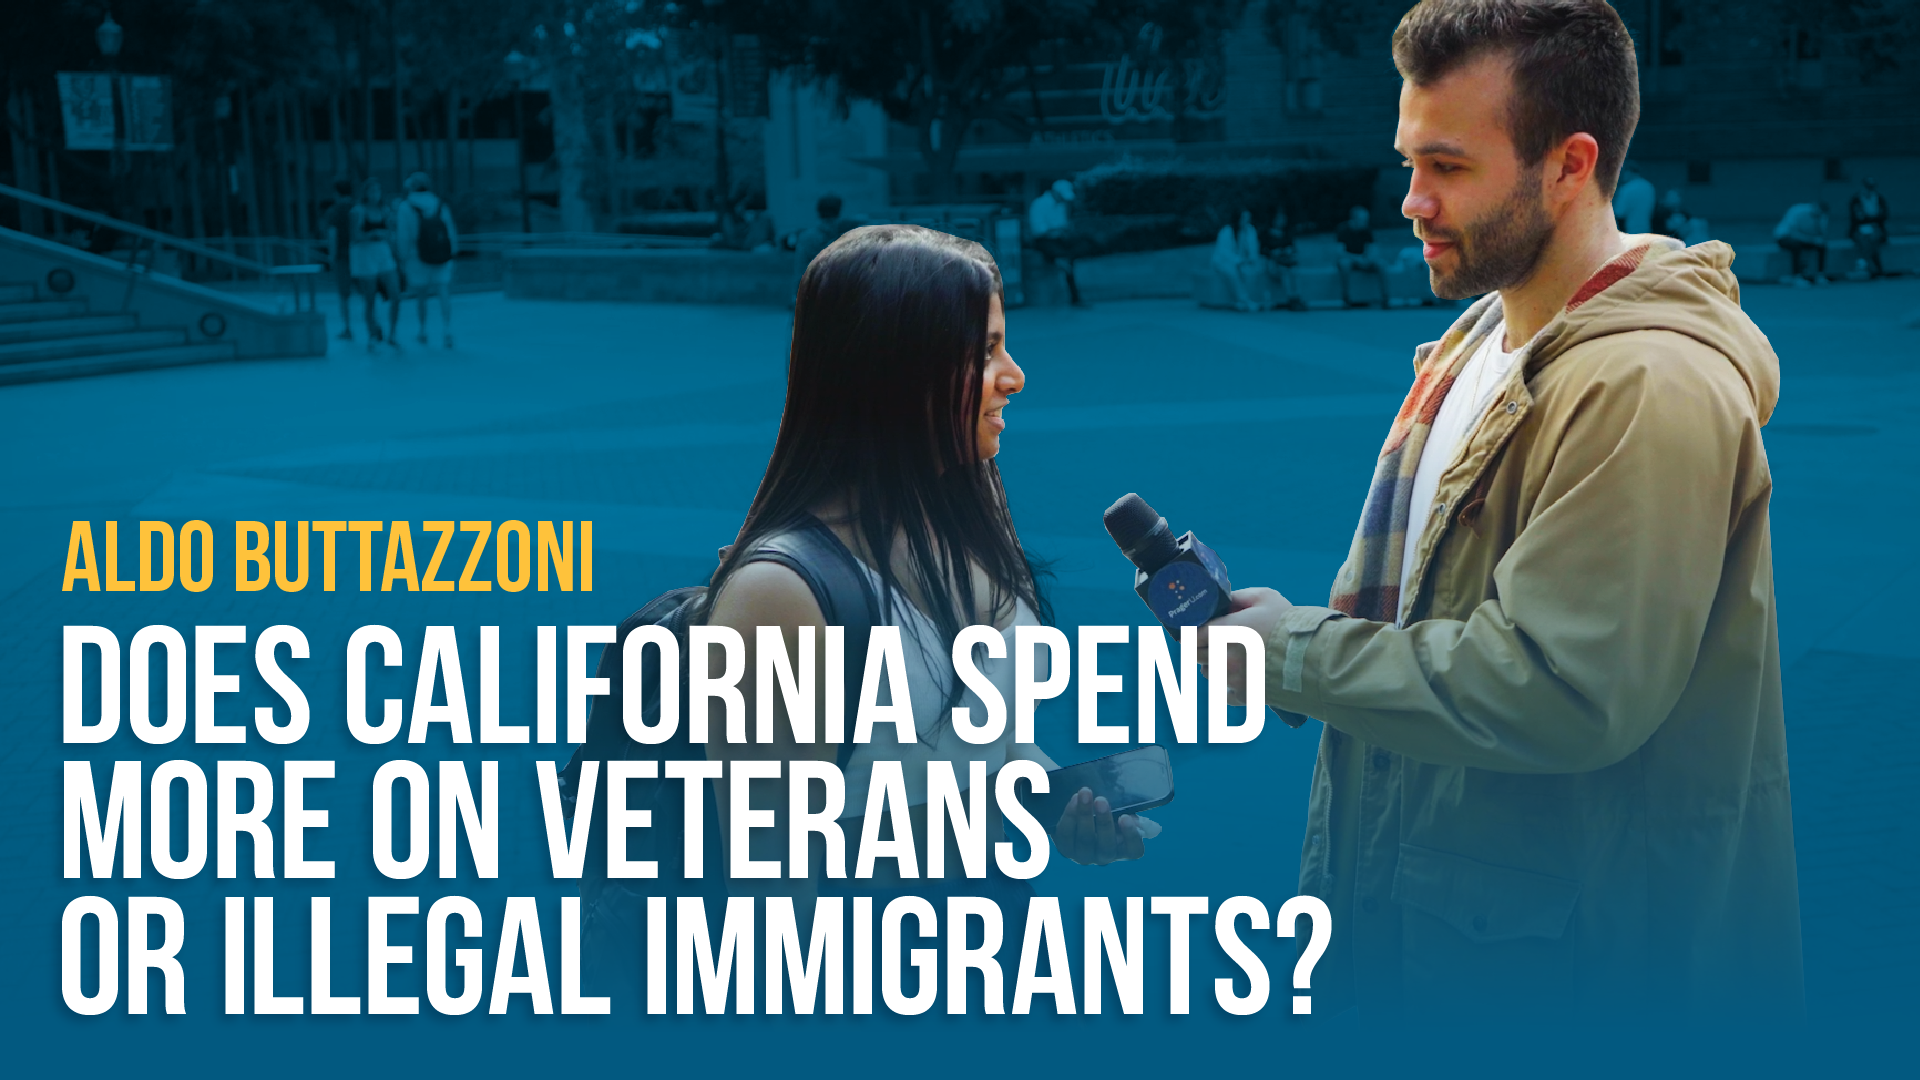 Does California Spend More on Veterans or Illegal Immigrants?